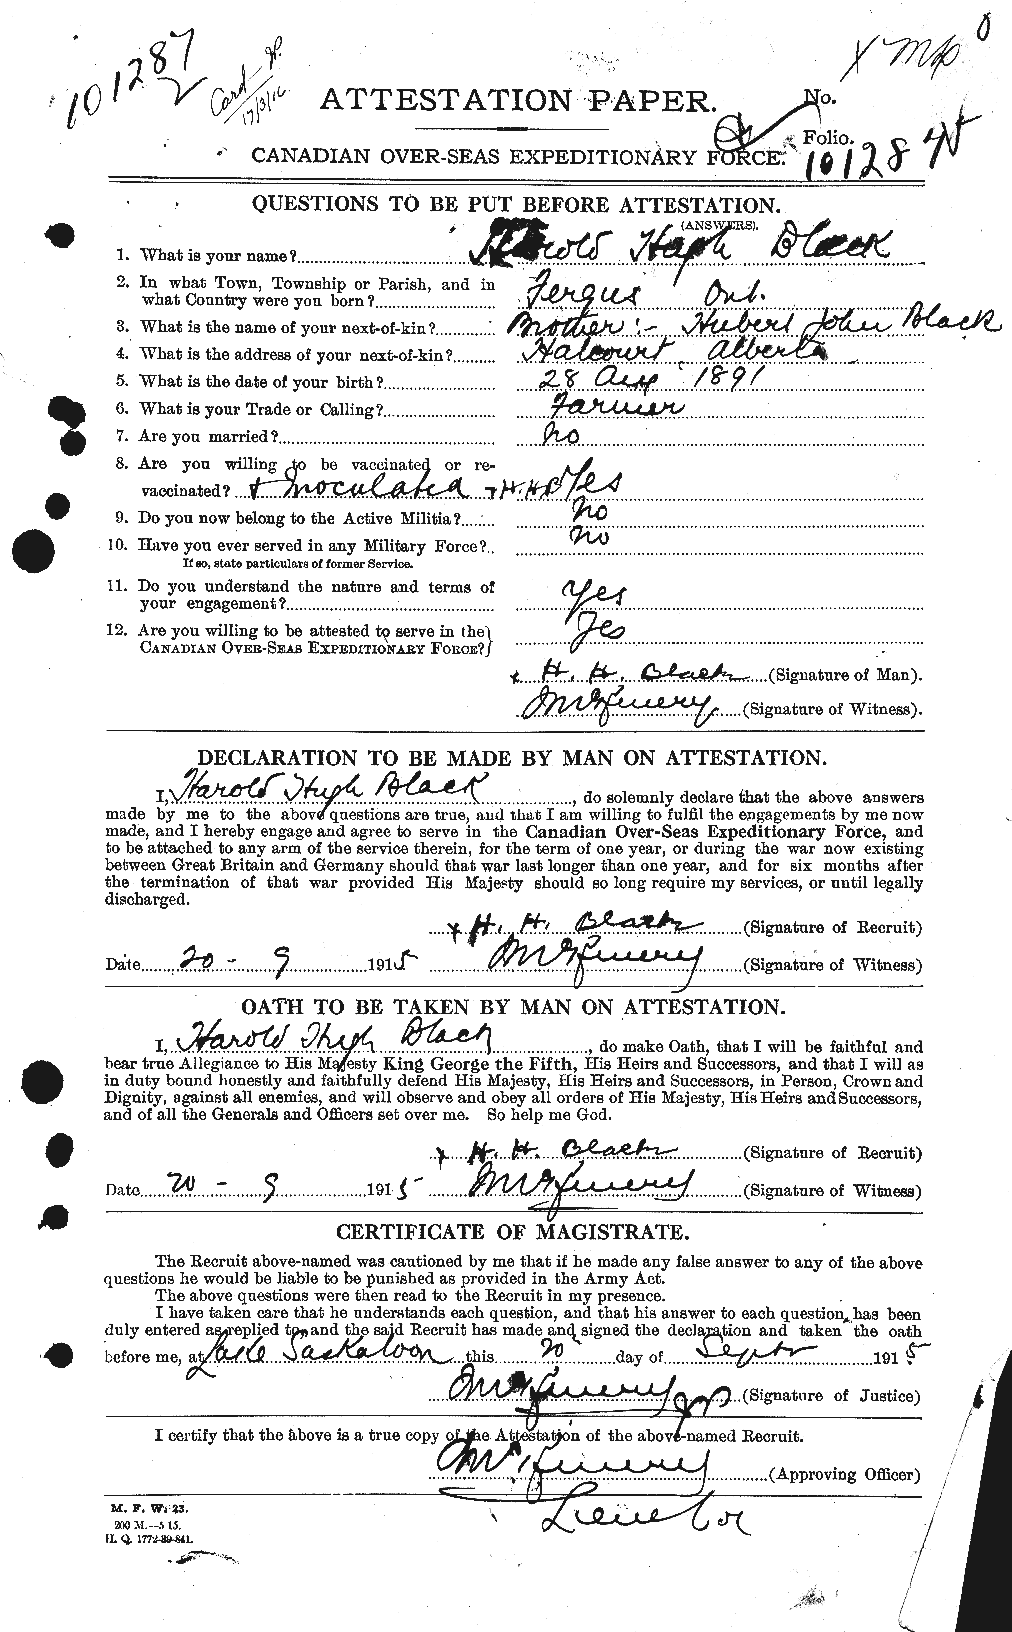 Personnel Records of the First World War - CEF 241391a